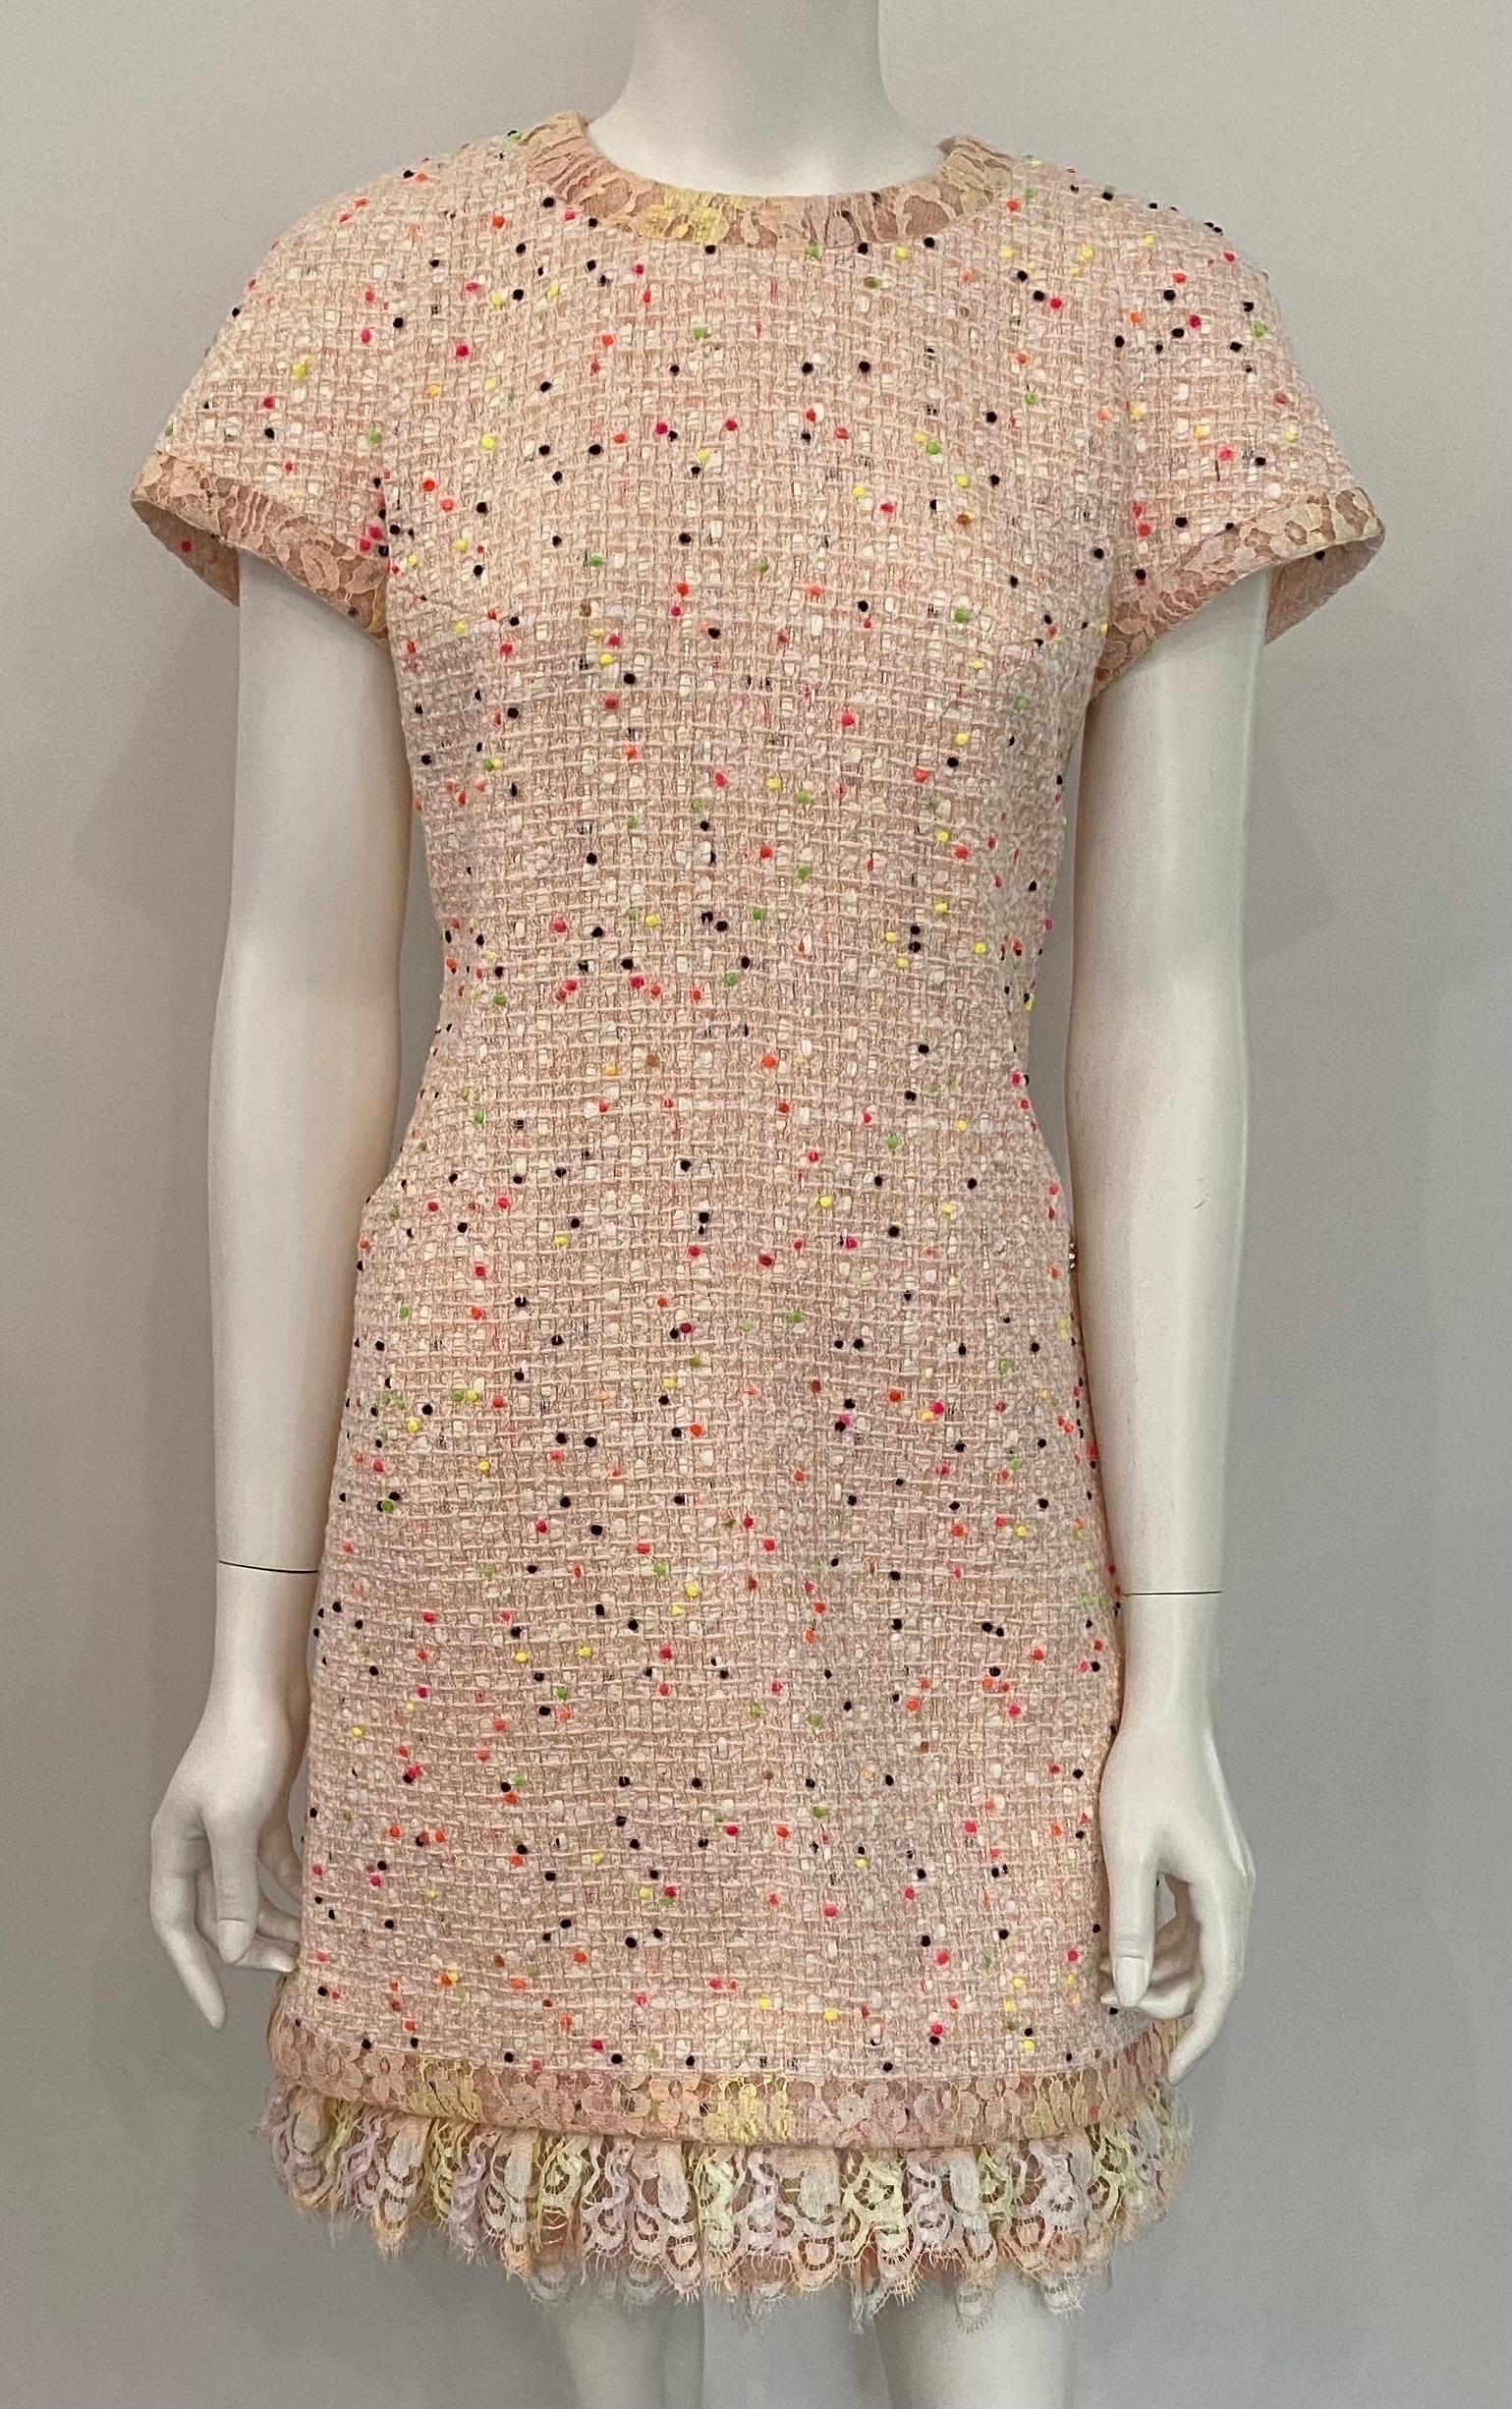 Beige Chanel Peach and multi dot tweed Dress with removable lace detail - Sz 36